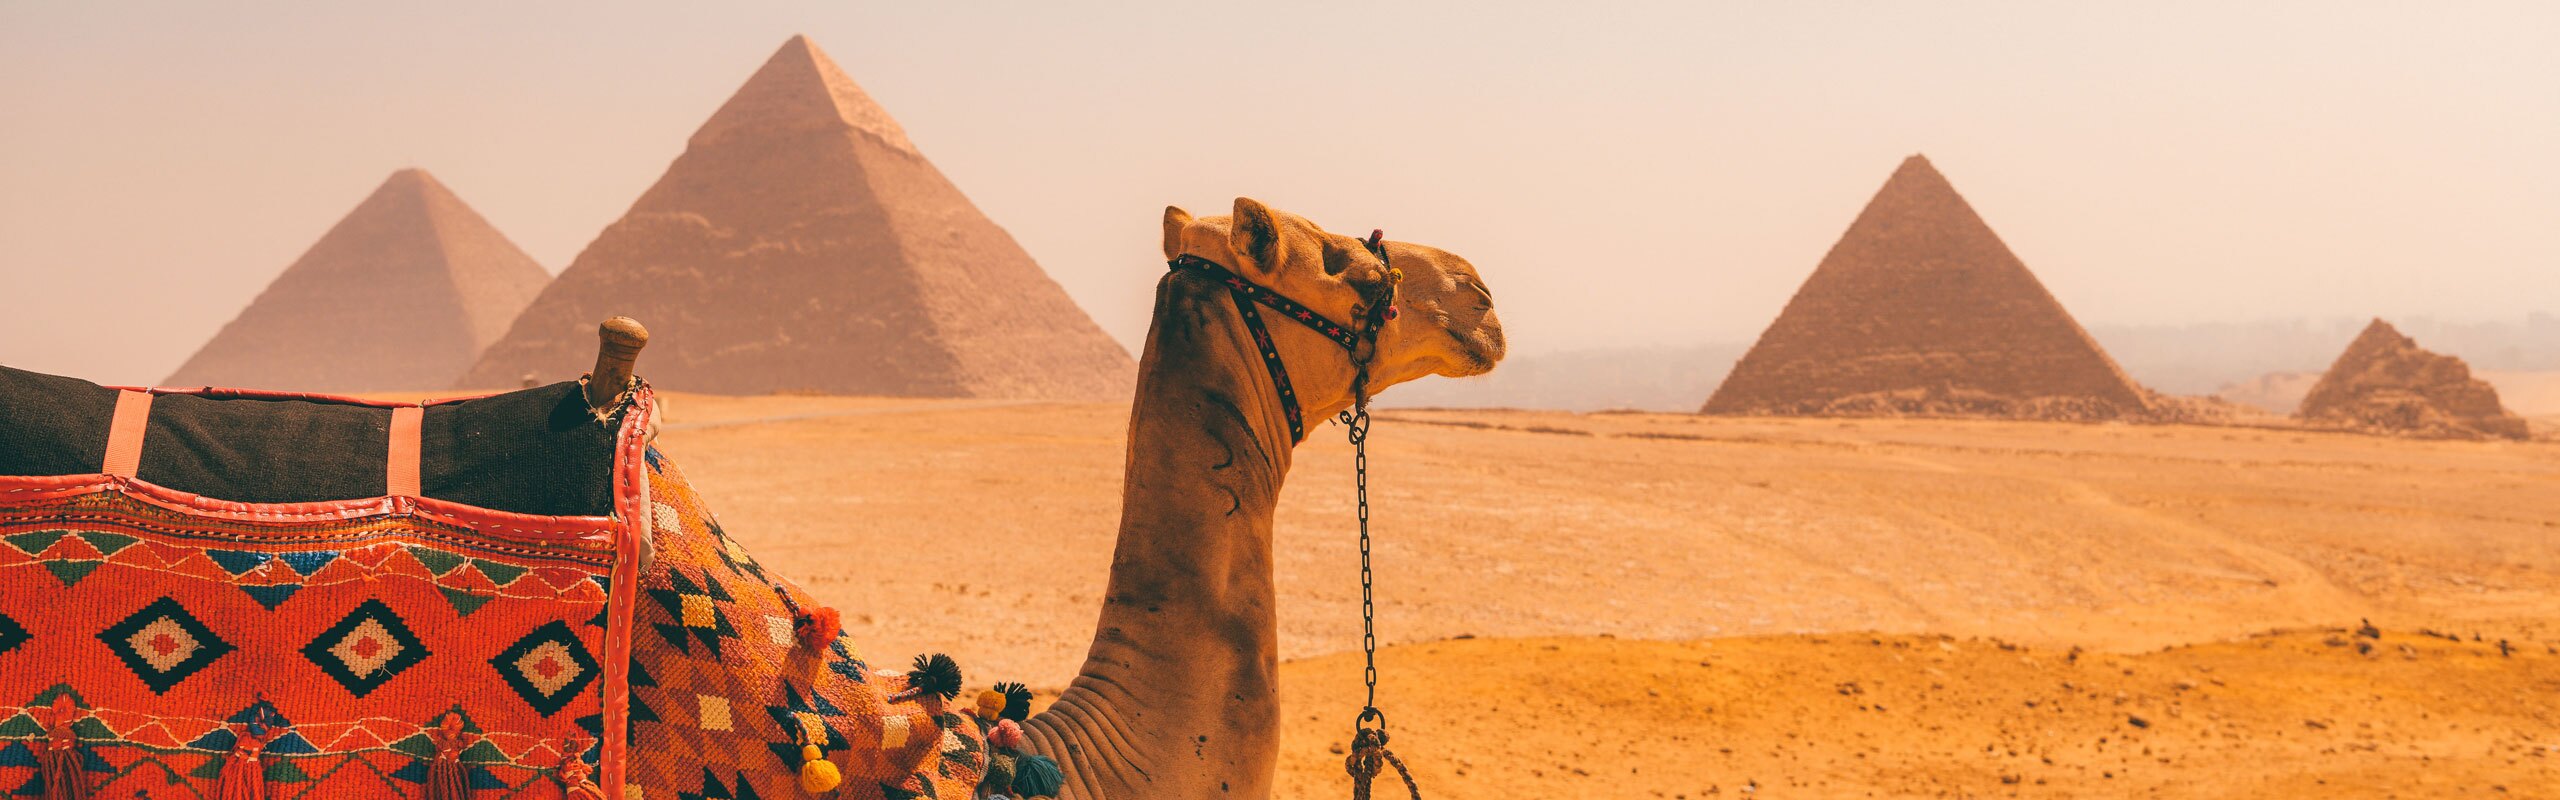 8-Day Egypt Essence with Nile Cruise Tour